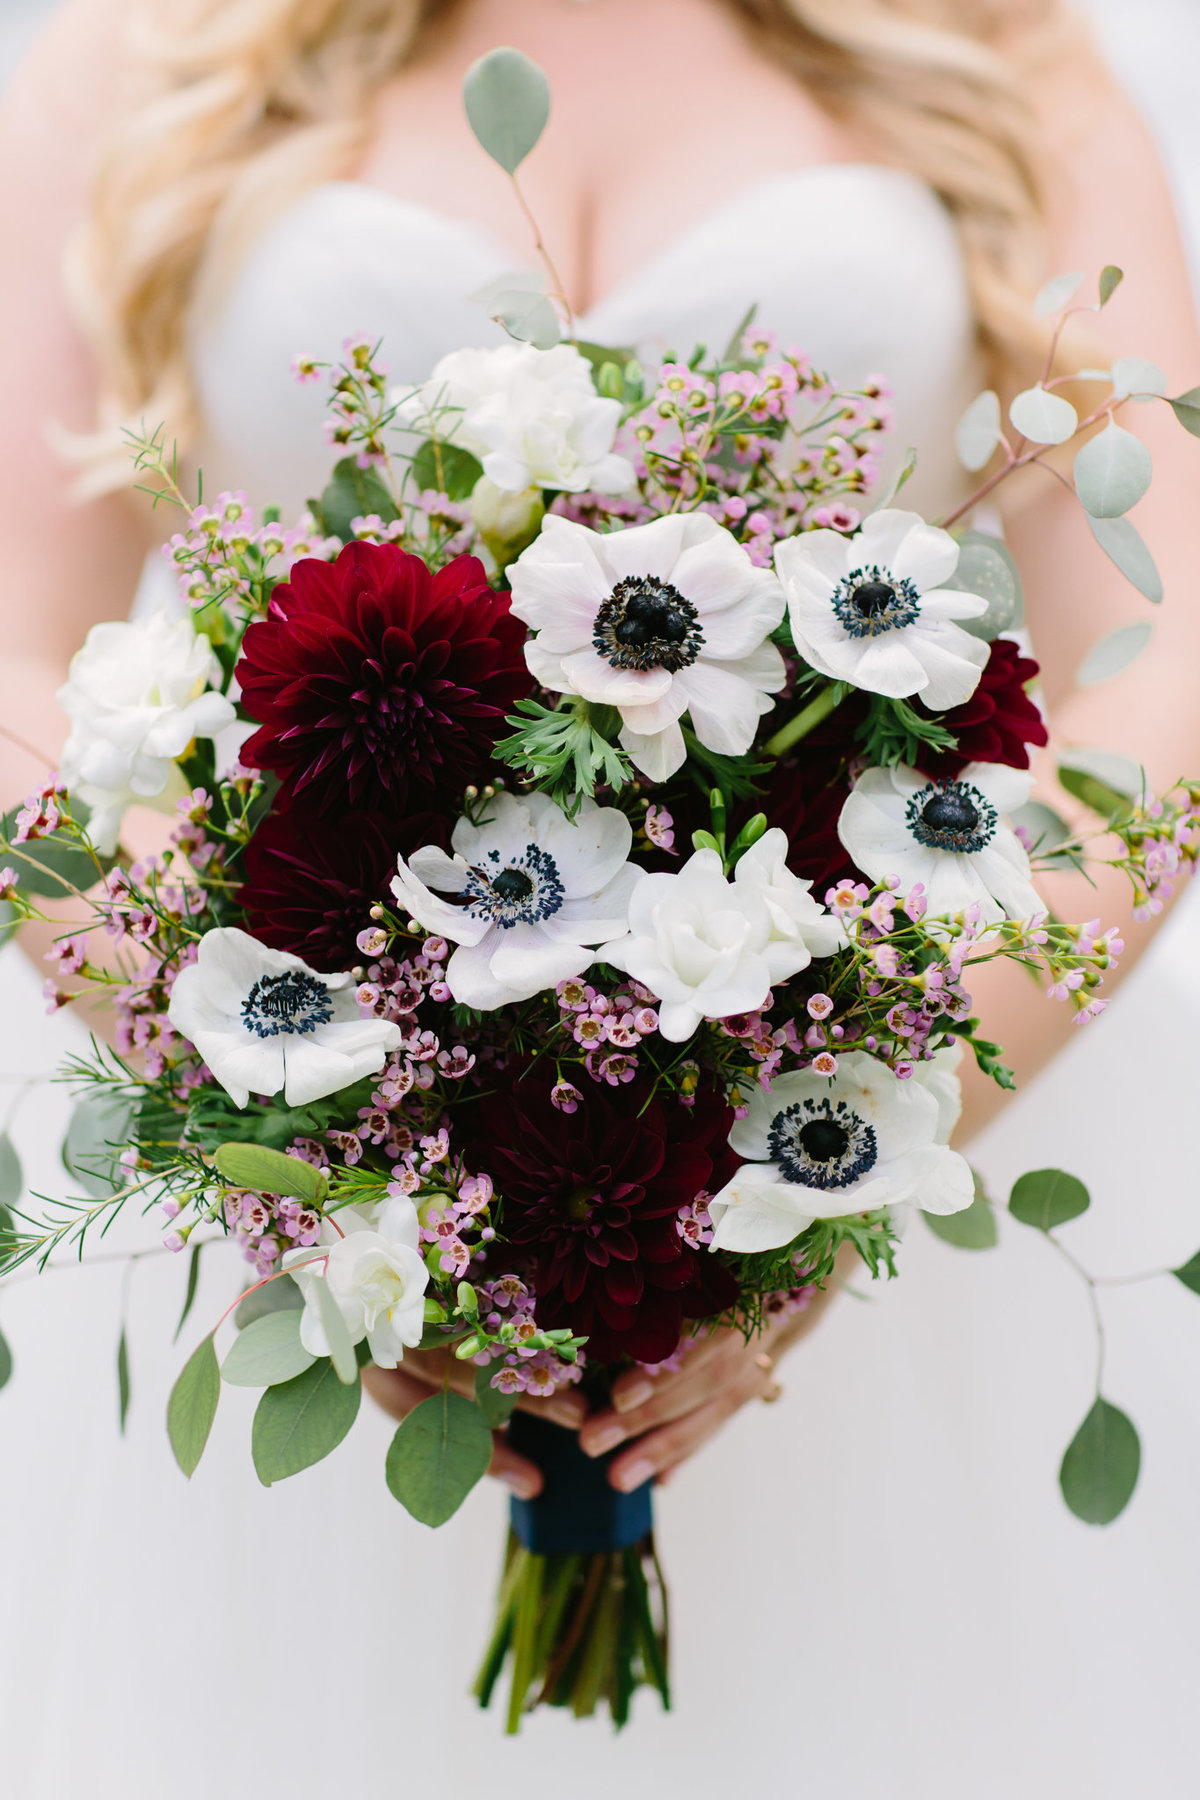 Bridal bouquet with fall tones and poppies